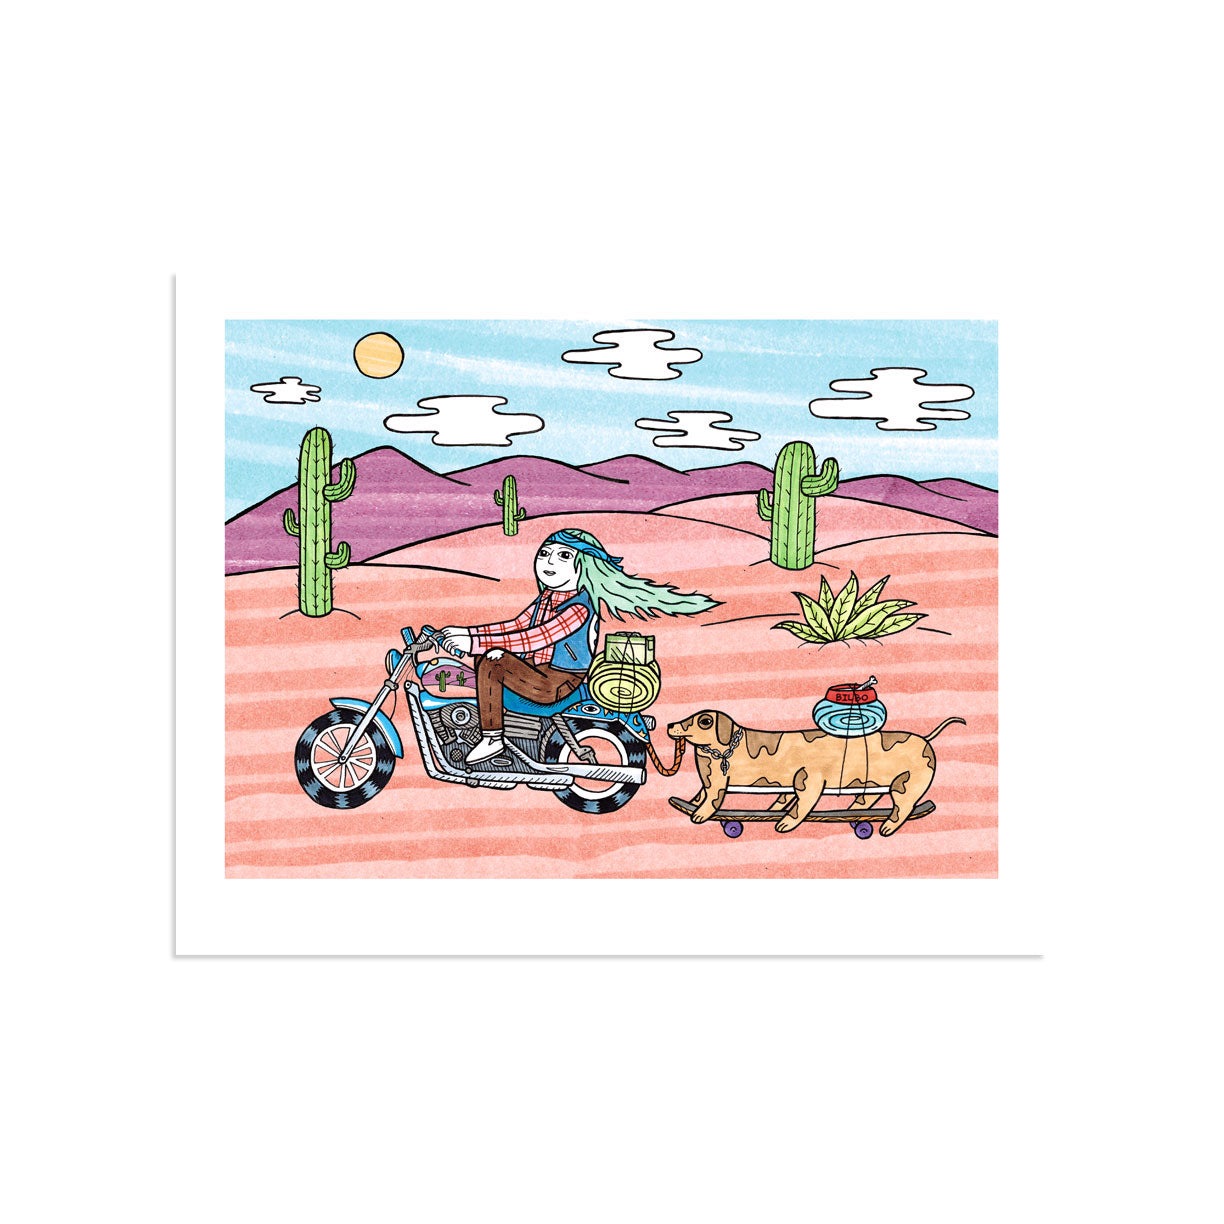 On the Magical Bike Adventure... by Michael C. Hsiung | Print | Poster Child Prints